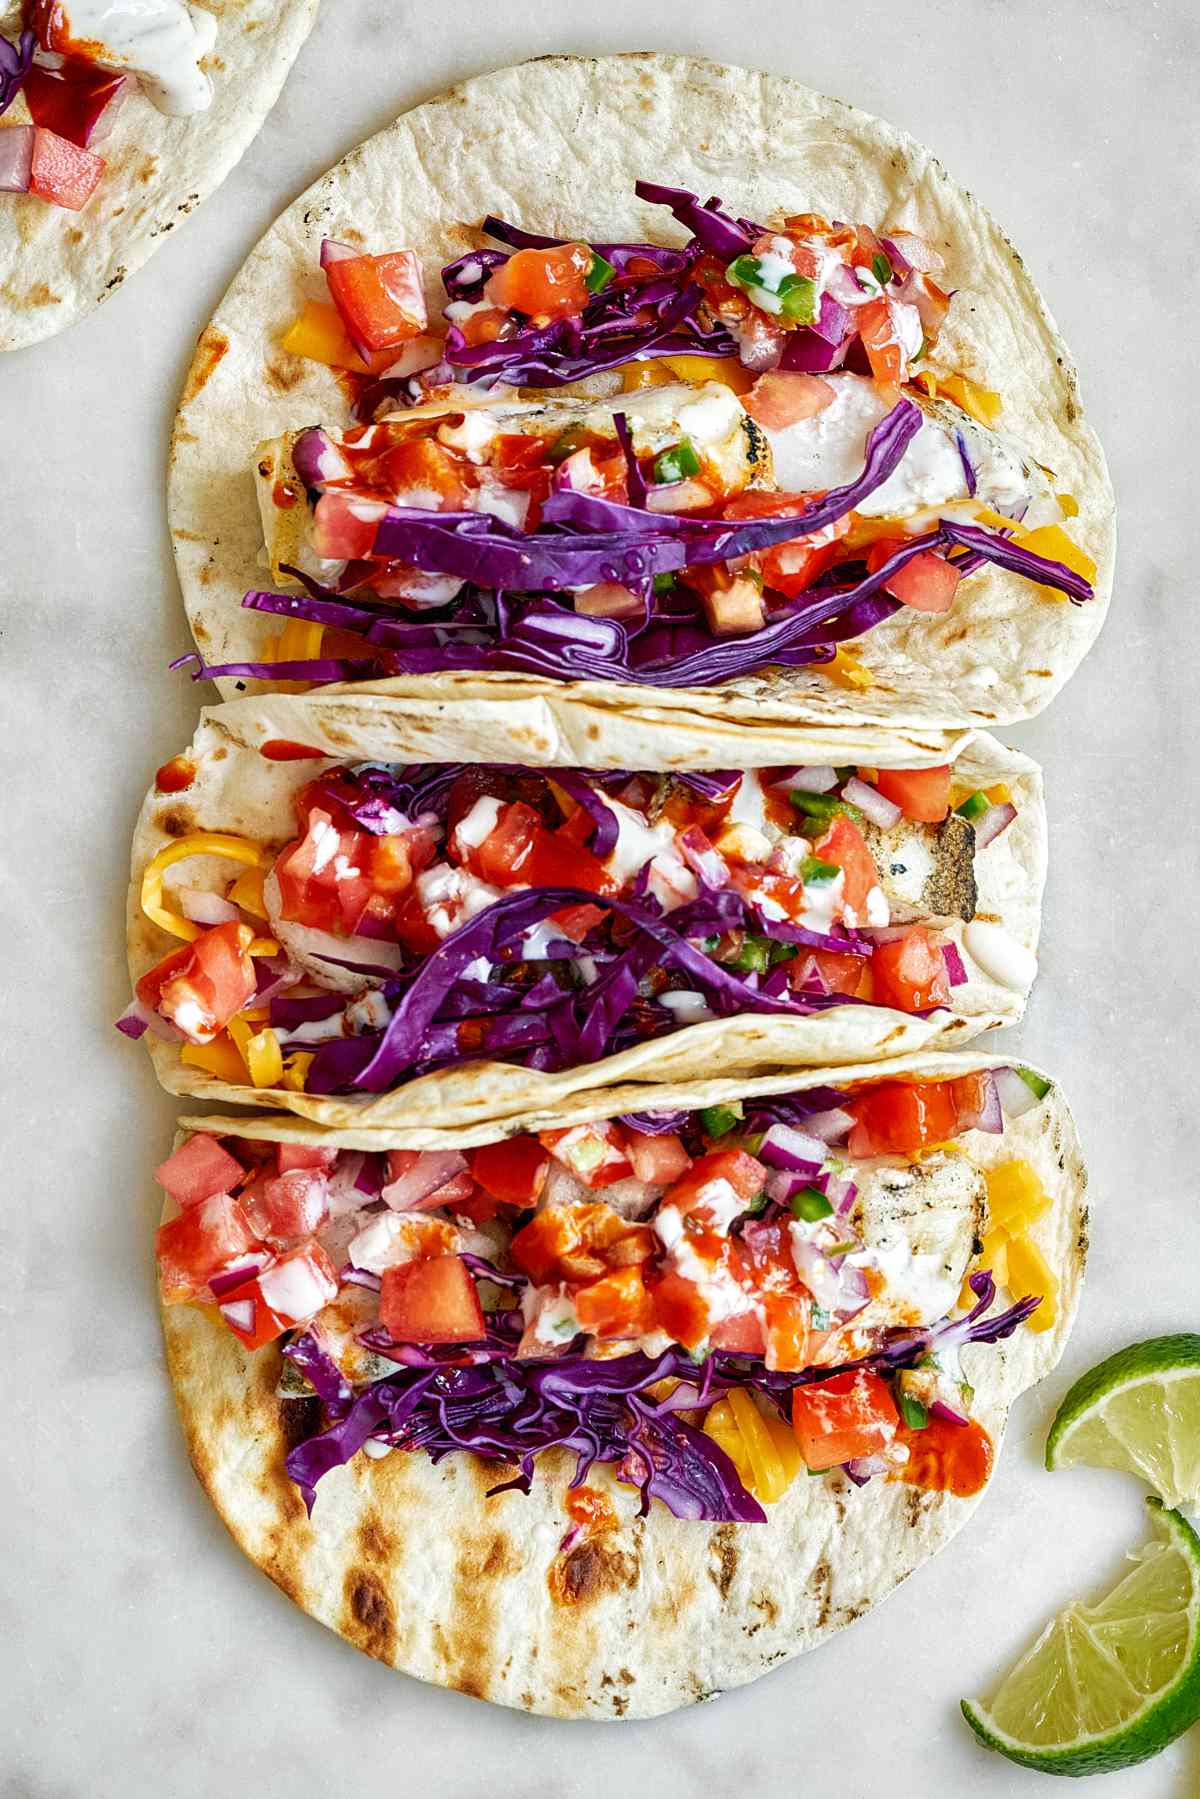 Four white fish tacos with pico de gallo, purple cabbage,  red onion topping.